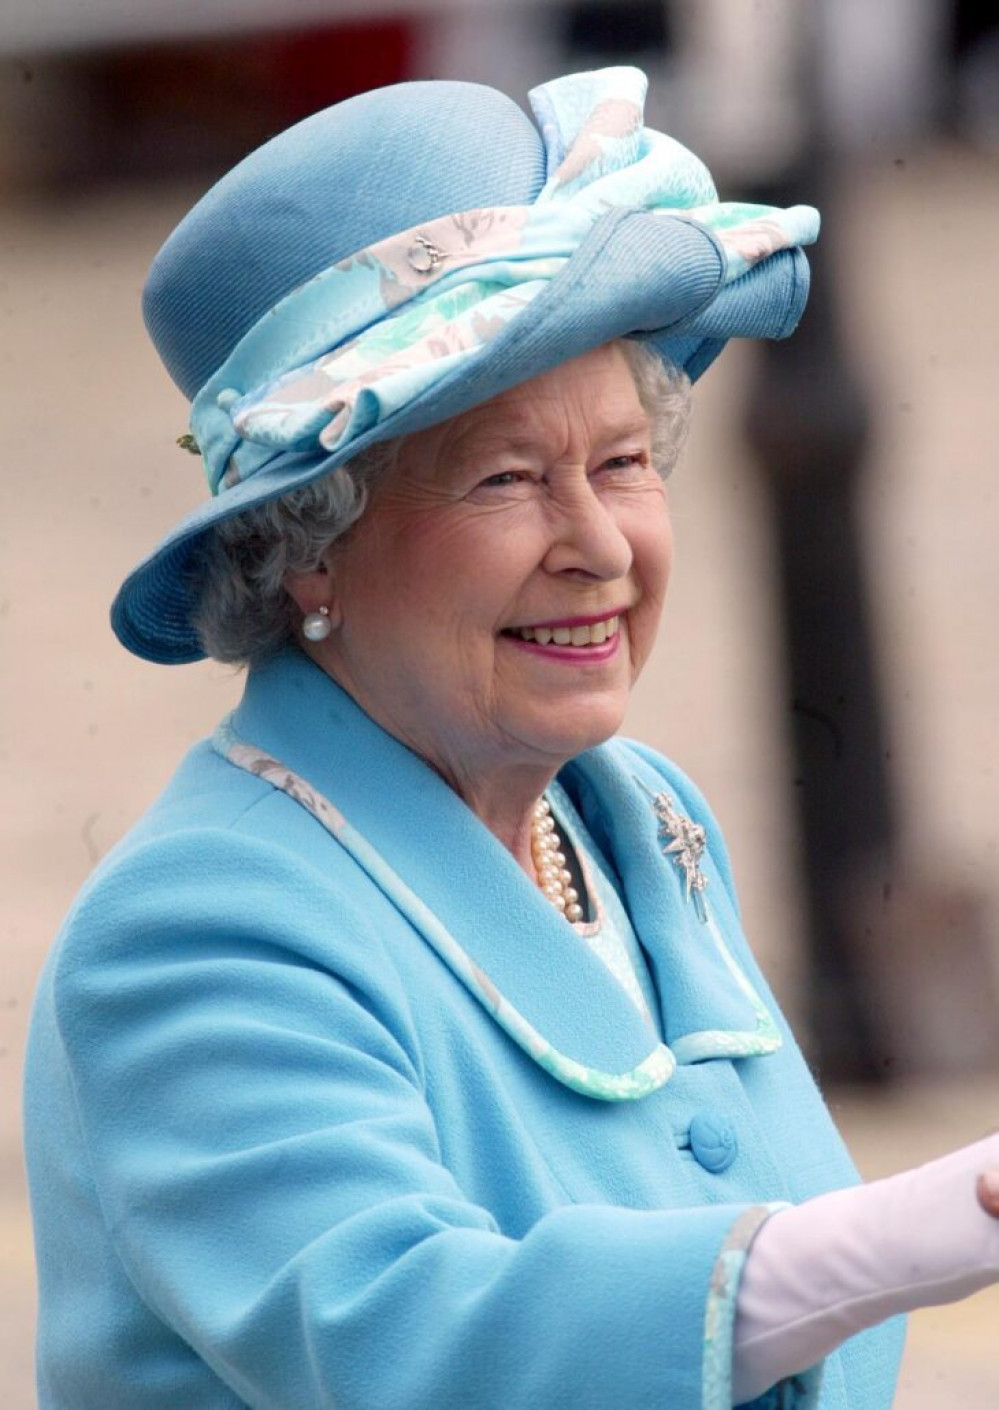 Axminster and surrounding villages will be holding a weekend of events to mark the Queen’s 70 years on the throne